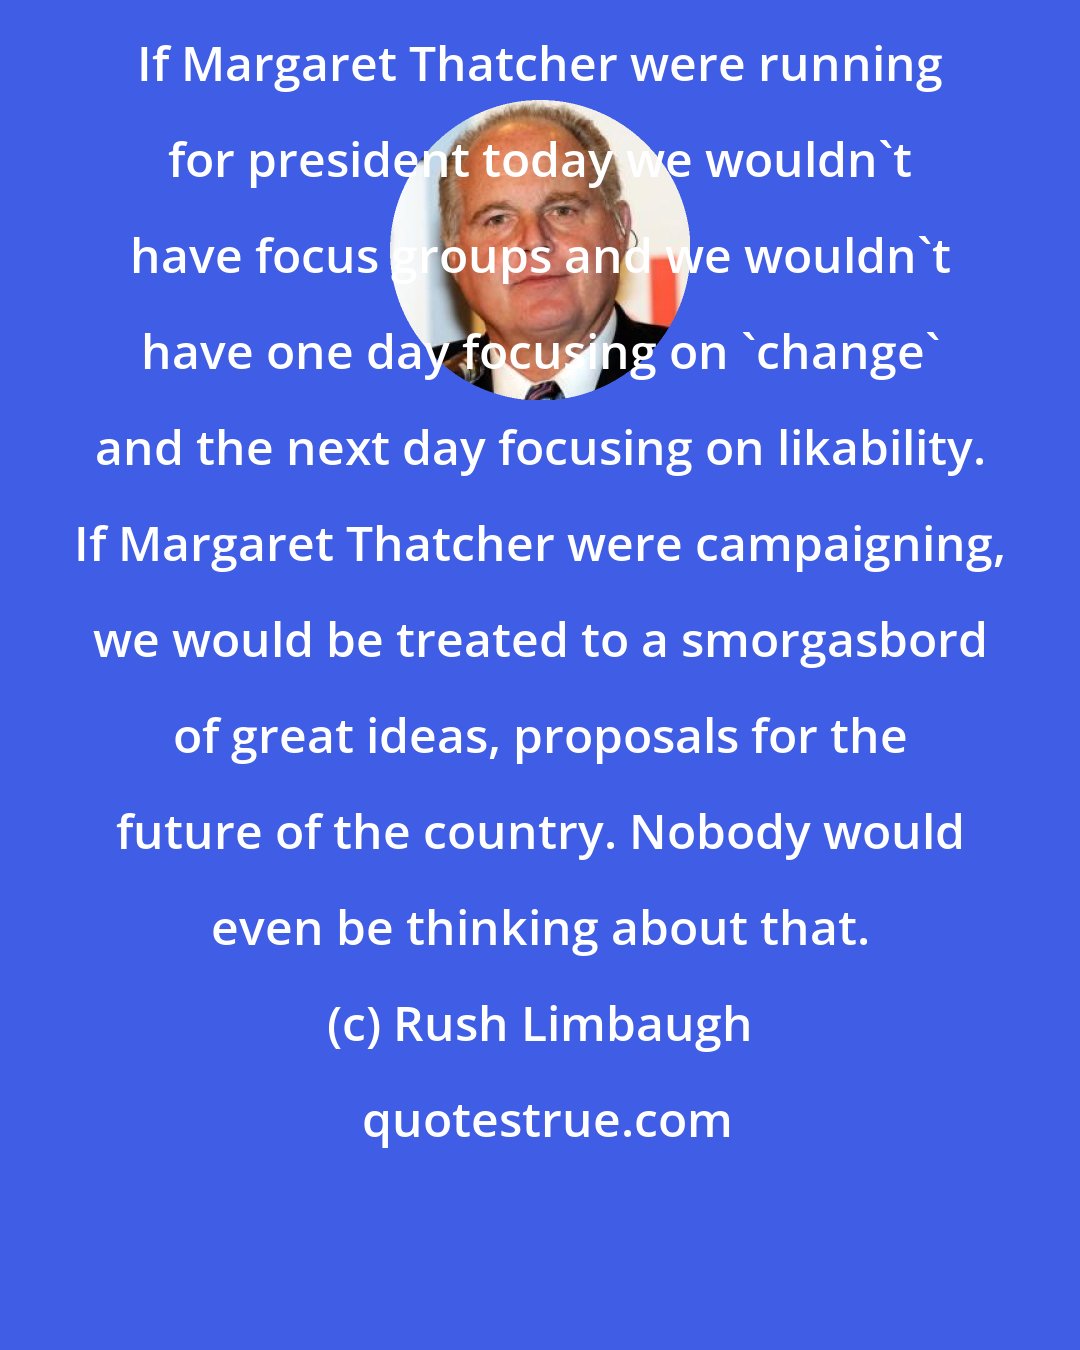 Rush Limbaugh: If Margaret Thatcher were running for president today we wouldn't have focus groups and we wouldn't have one day focusing on 'change' and the next day focusing on likability. If Margaret Thatcher were campaigning, we would be treated to a smorgasbord of great ideas, proposals for the future of the country. Nobody would even be thinking about that.